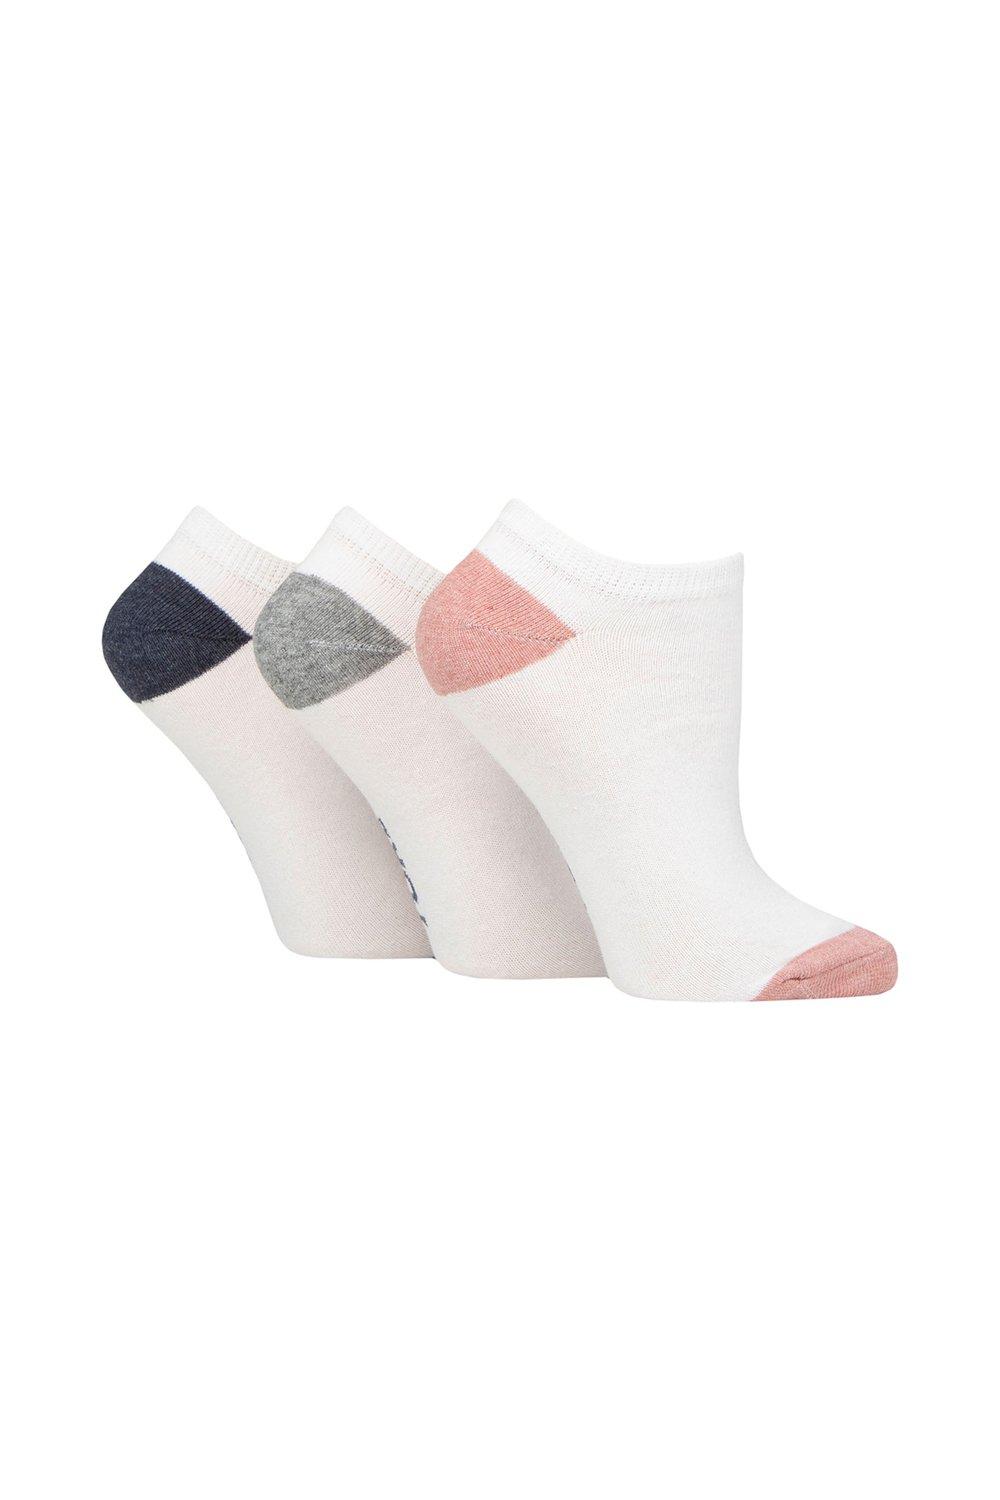 3 Pair 100% Recycled Heel and Toe Cotton Trainer Socks